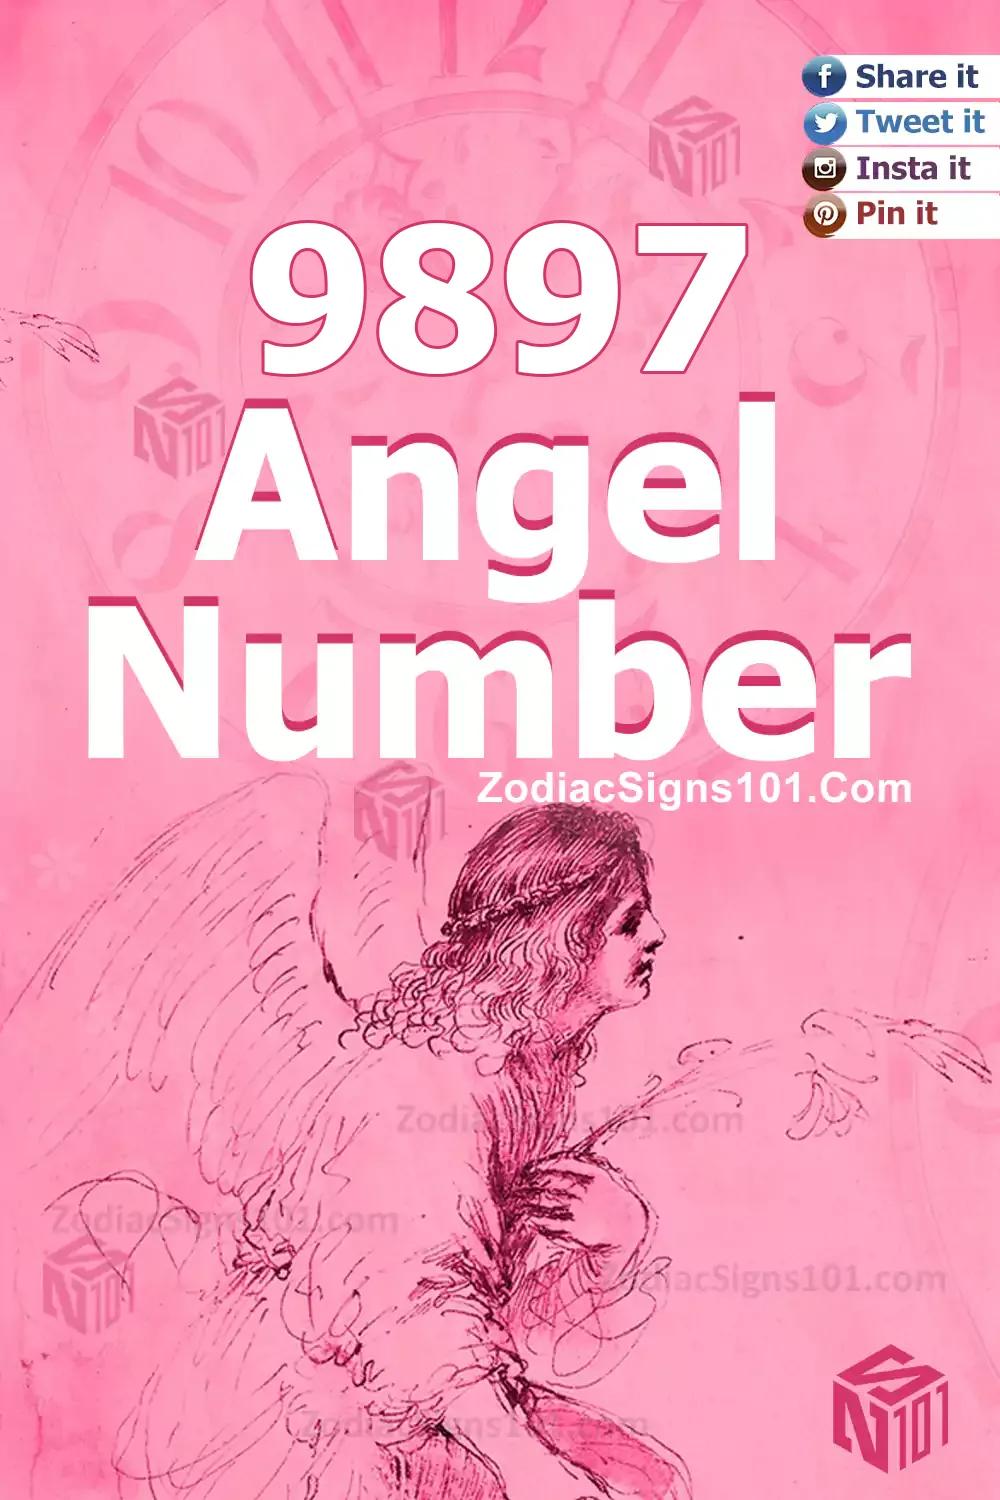 9897 Angel Number Meaning